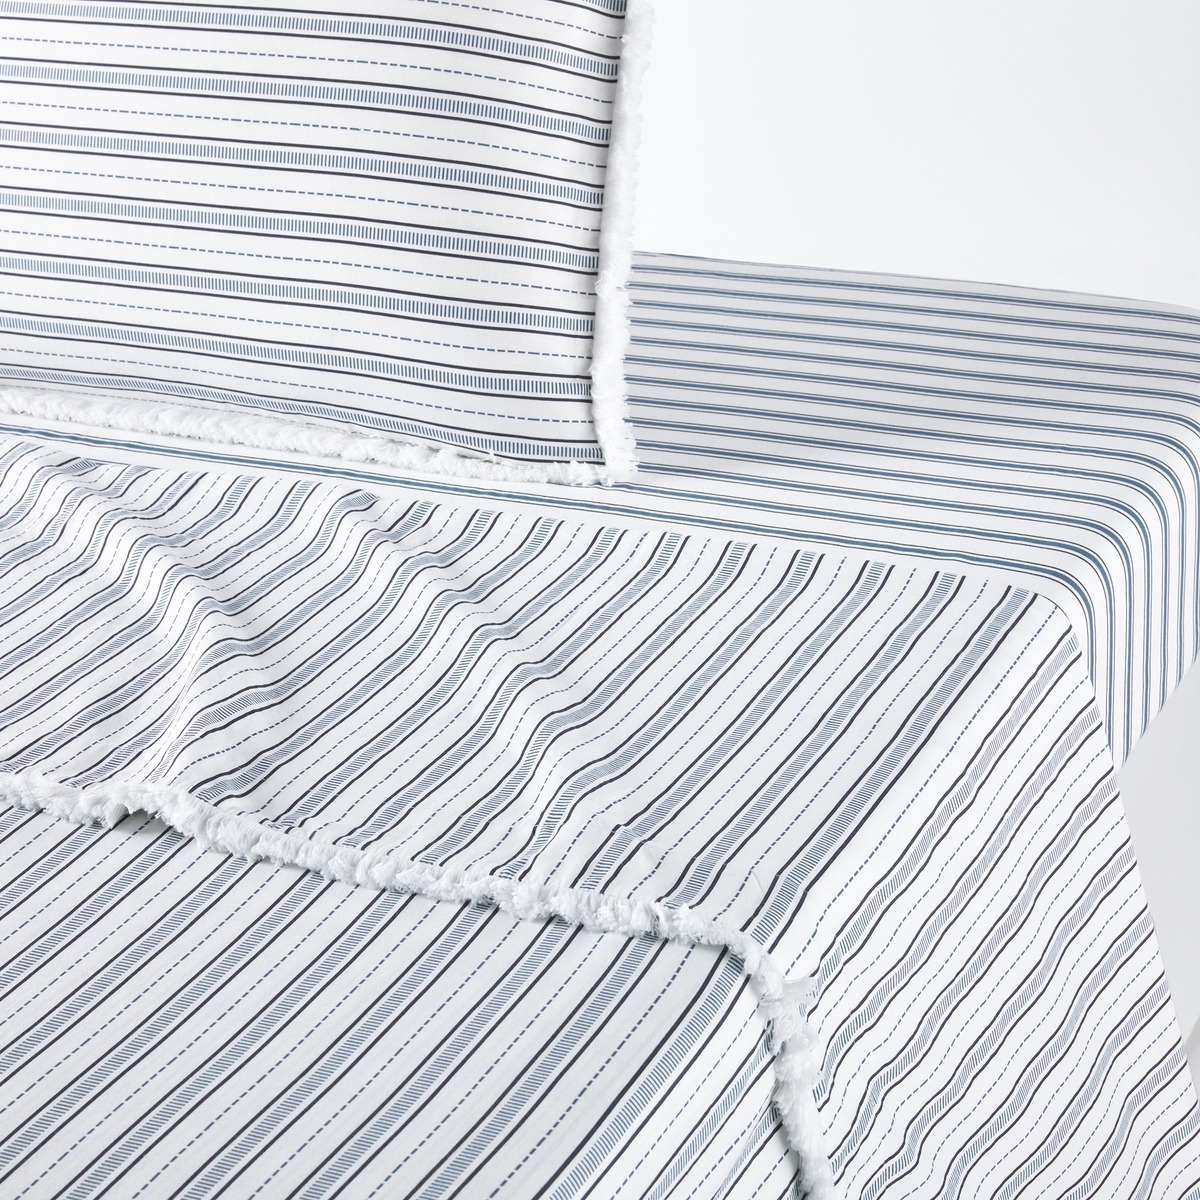 Comporta Flat Sheet in Nautical Striped Washed Cotton